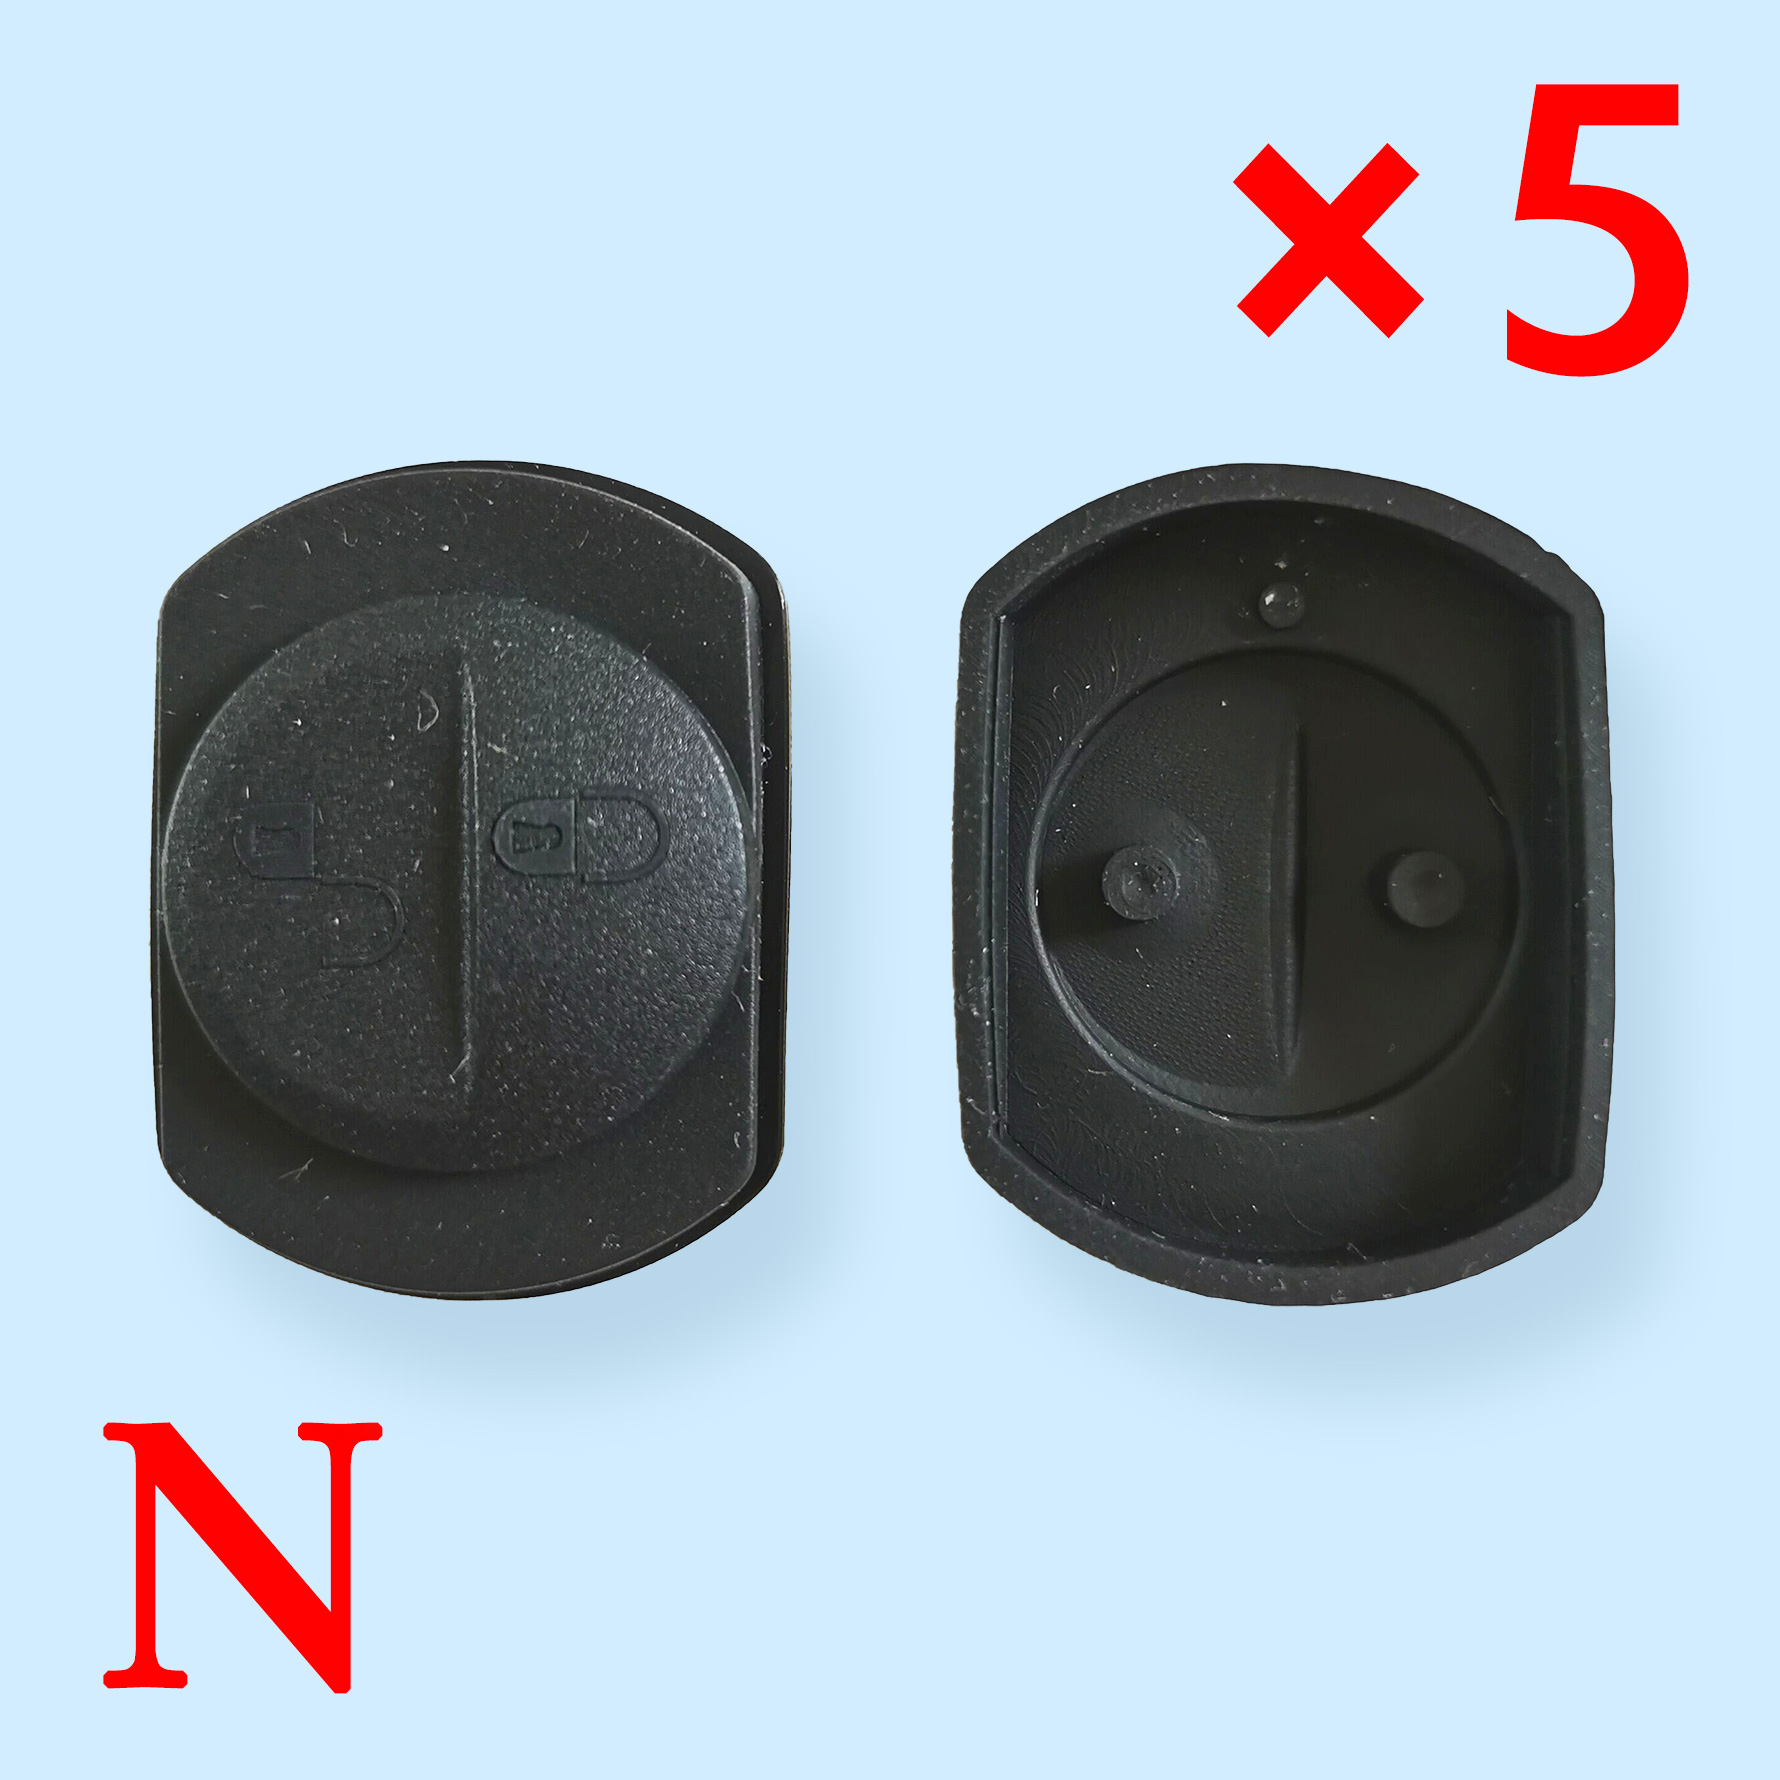 2 Buttons Remote Key Shell Cover for Mitsubishi ( 5 pcs )